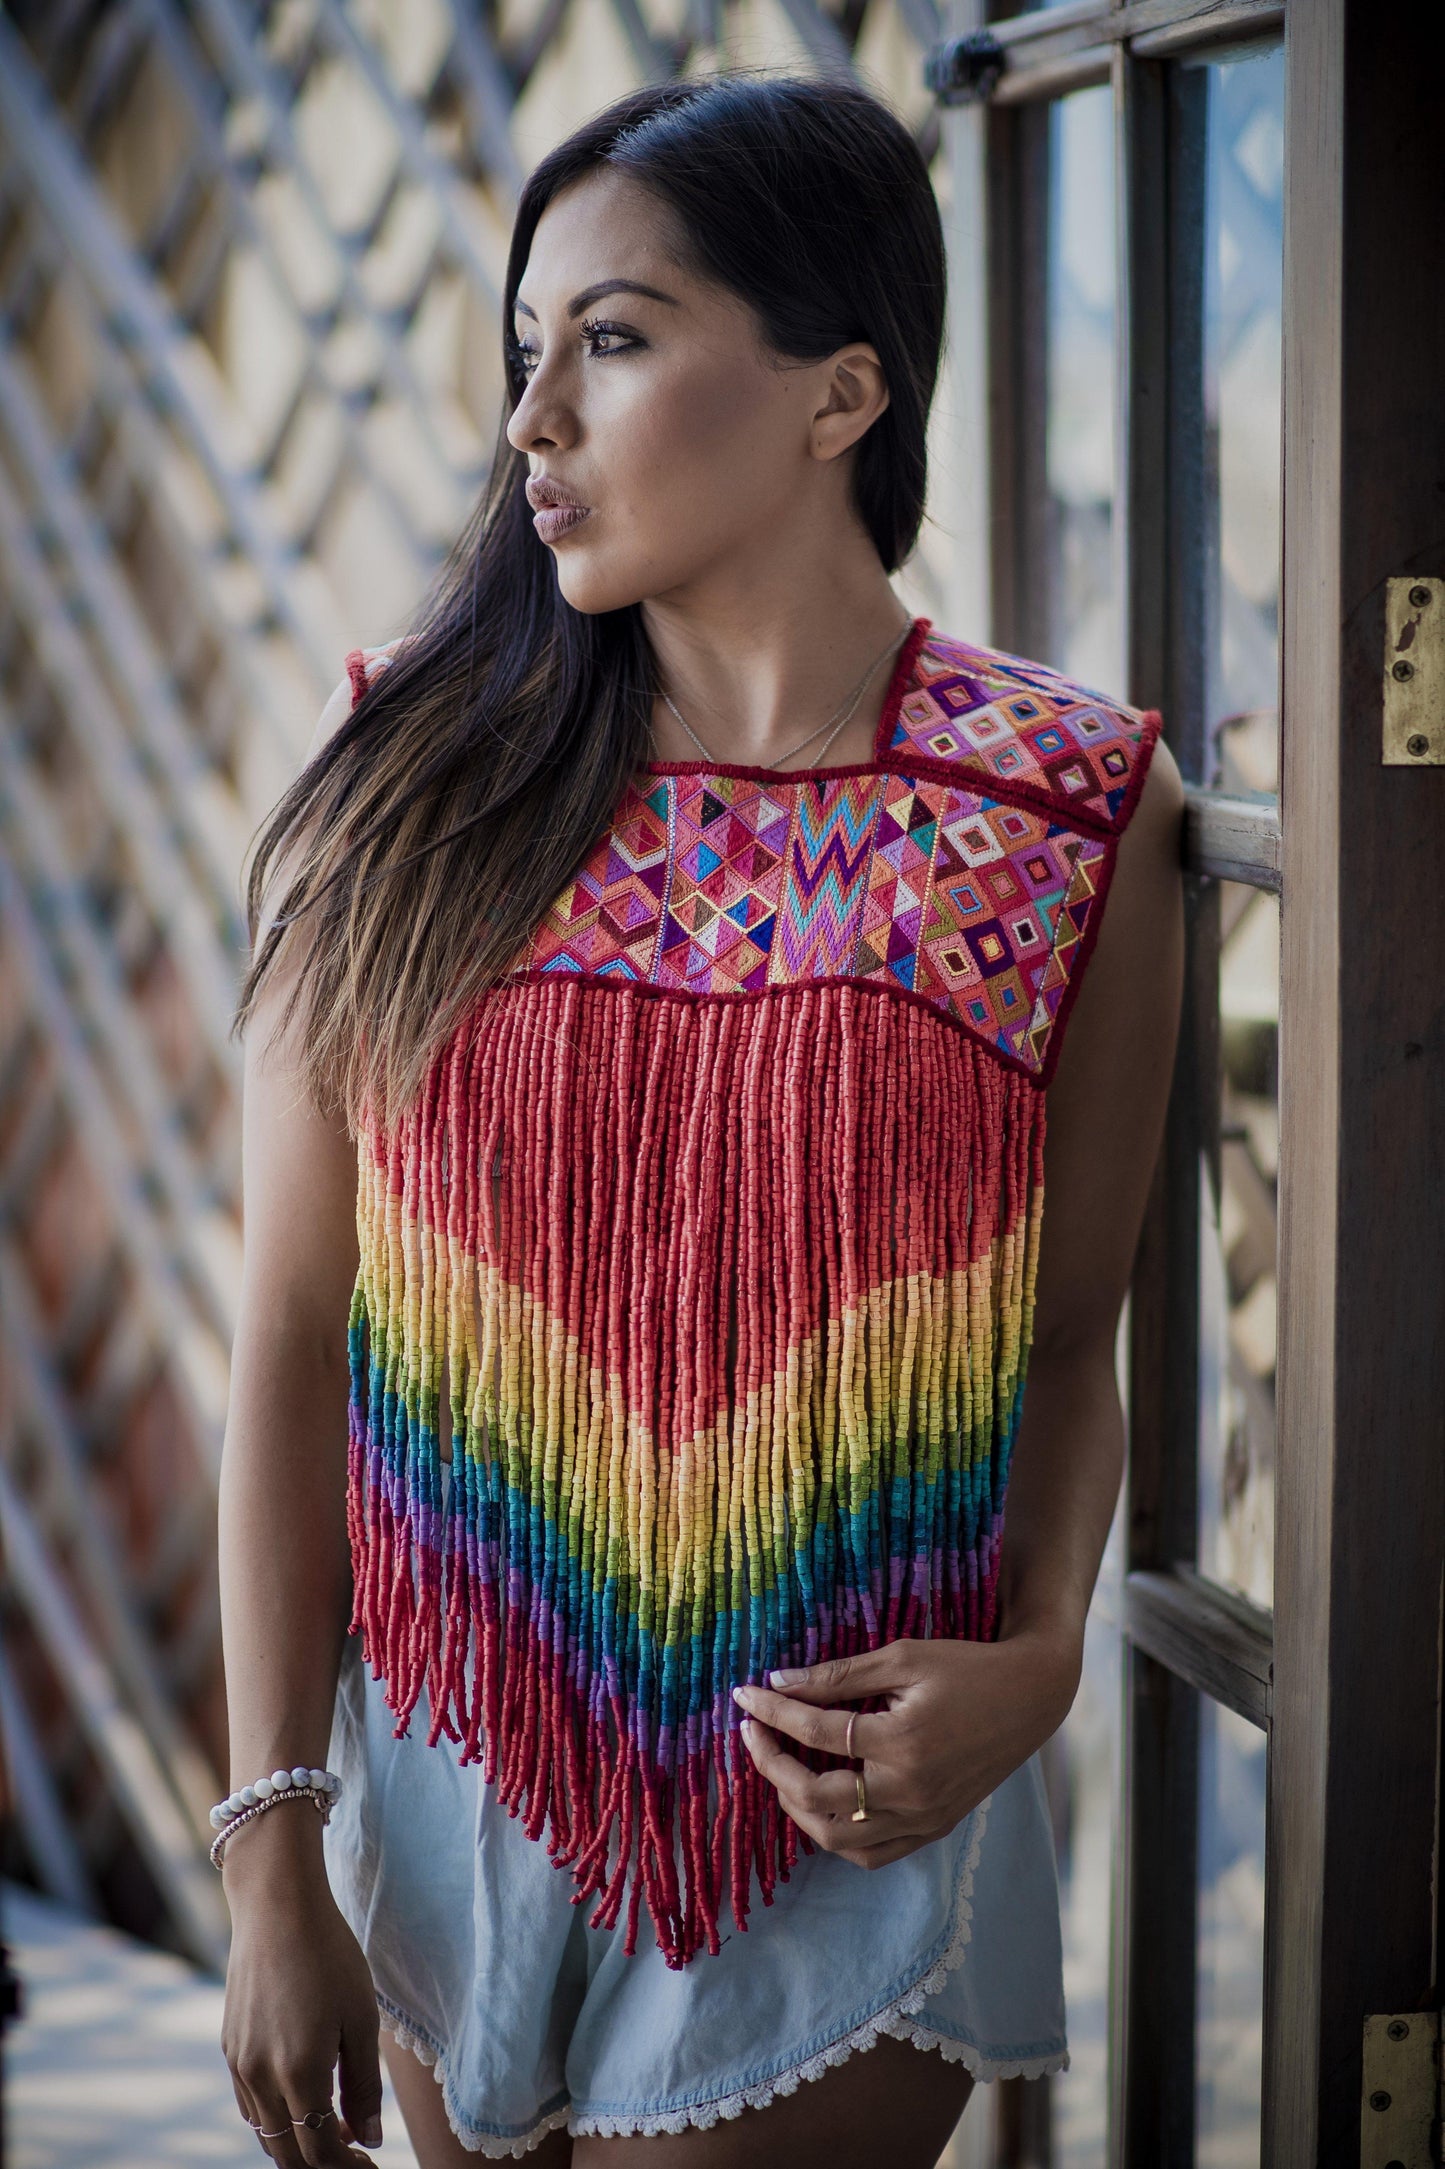 Ceremonial Textile Poncho with Beaded, Long Fringes - "Rainbow Magic"